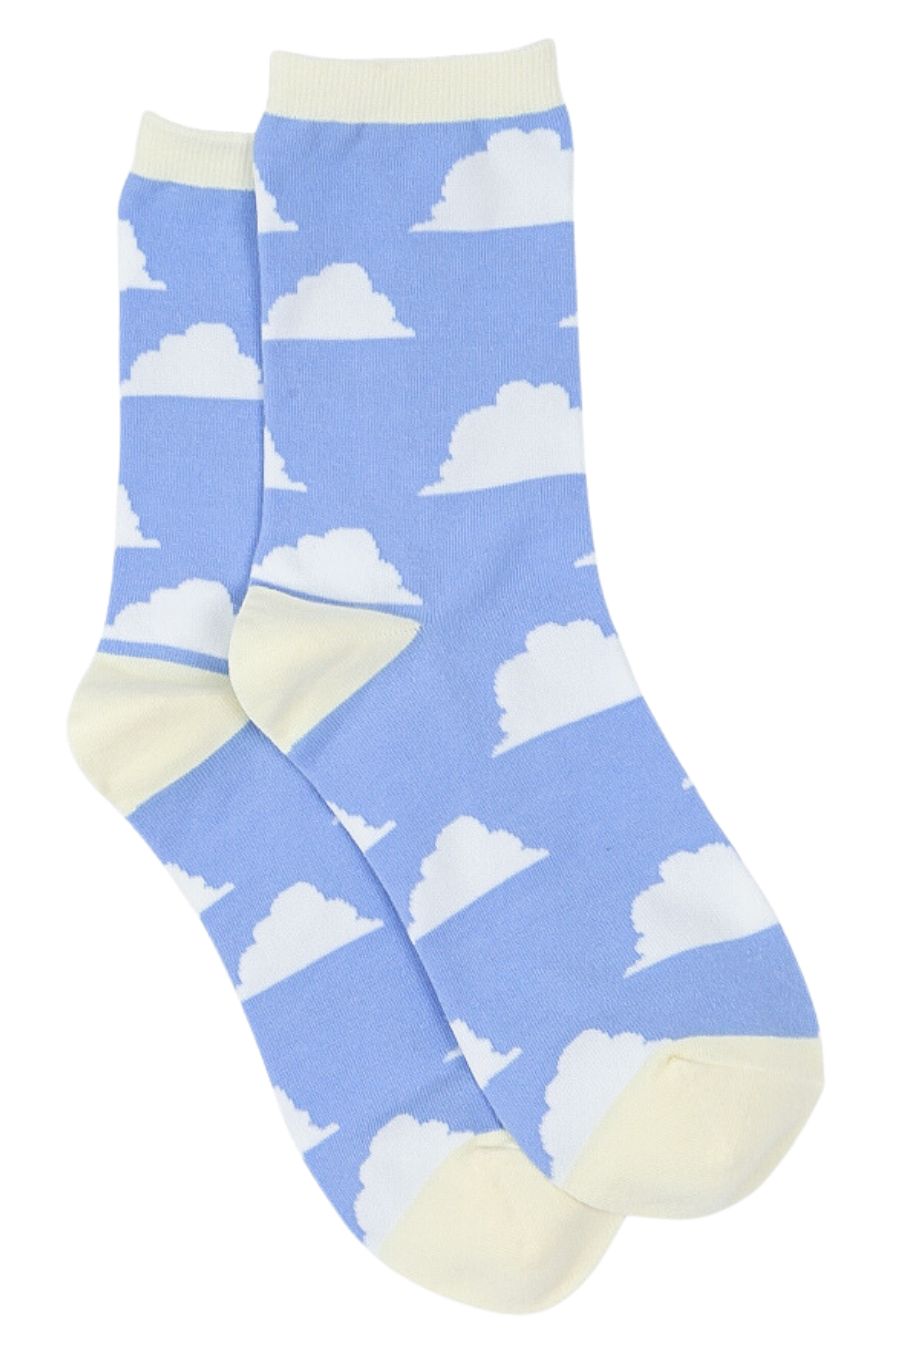 blue, yellow pastel ankle socks with a white cloud pattern